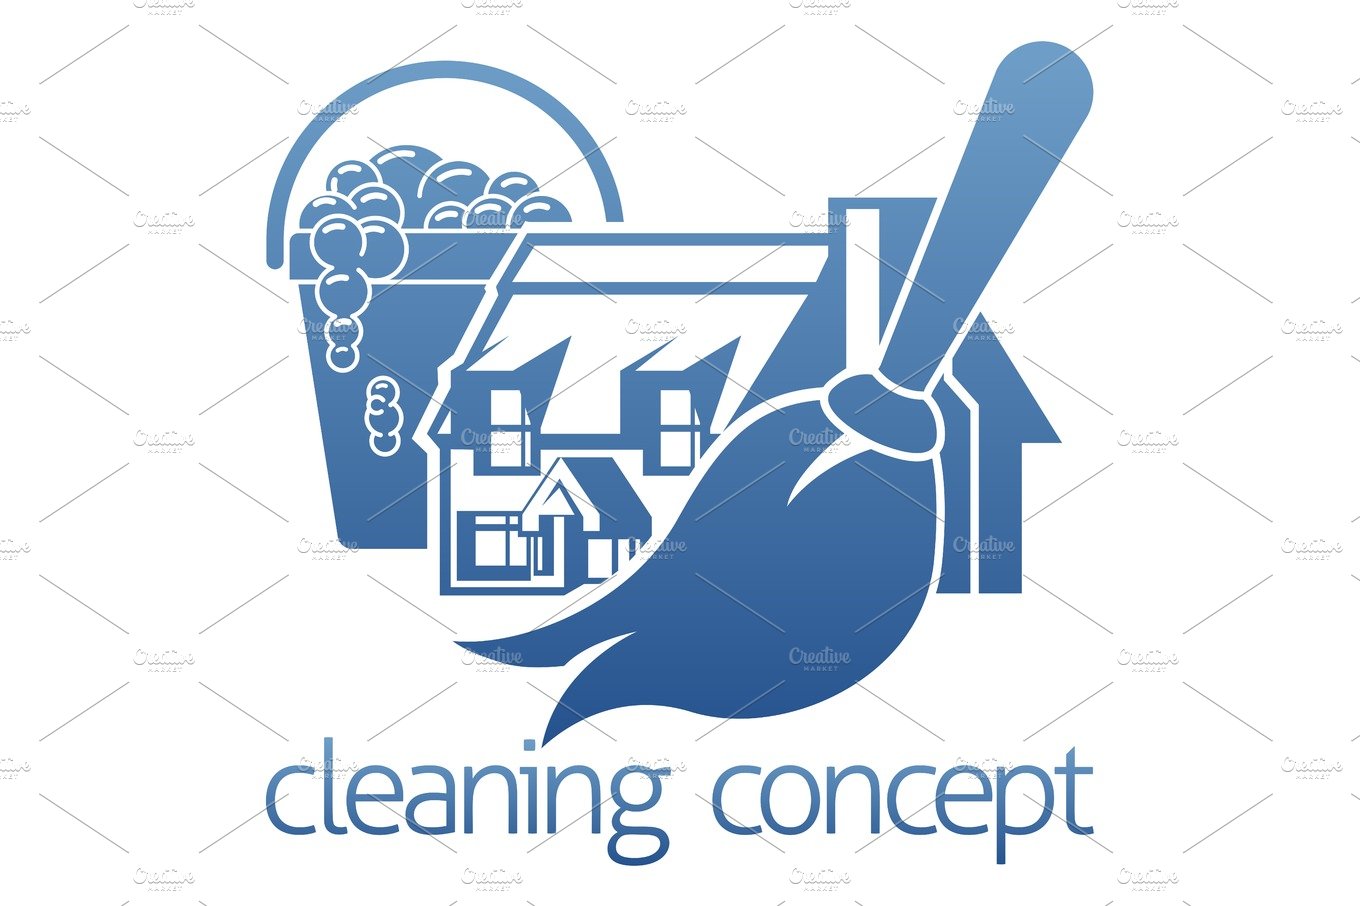 House Cleaning Concept cover image.